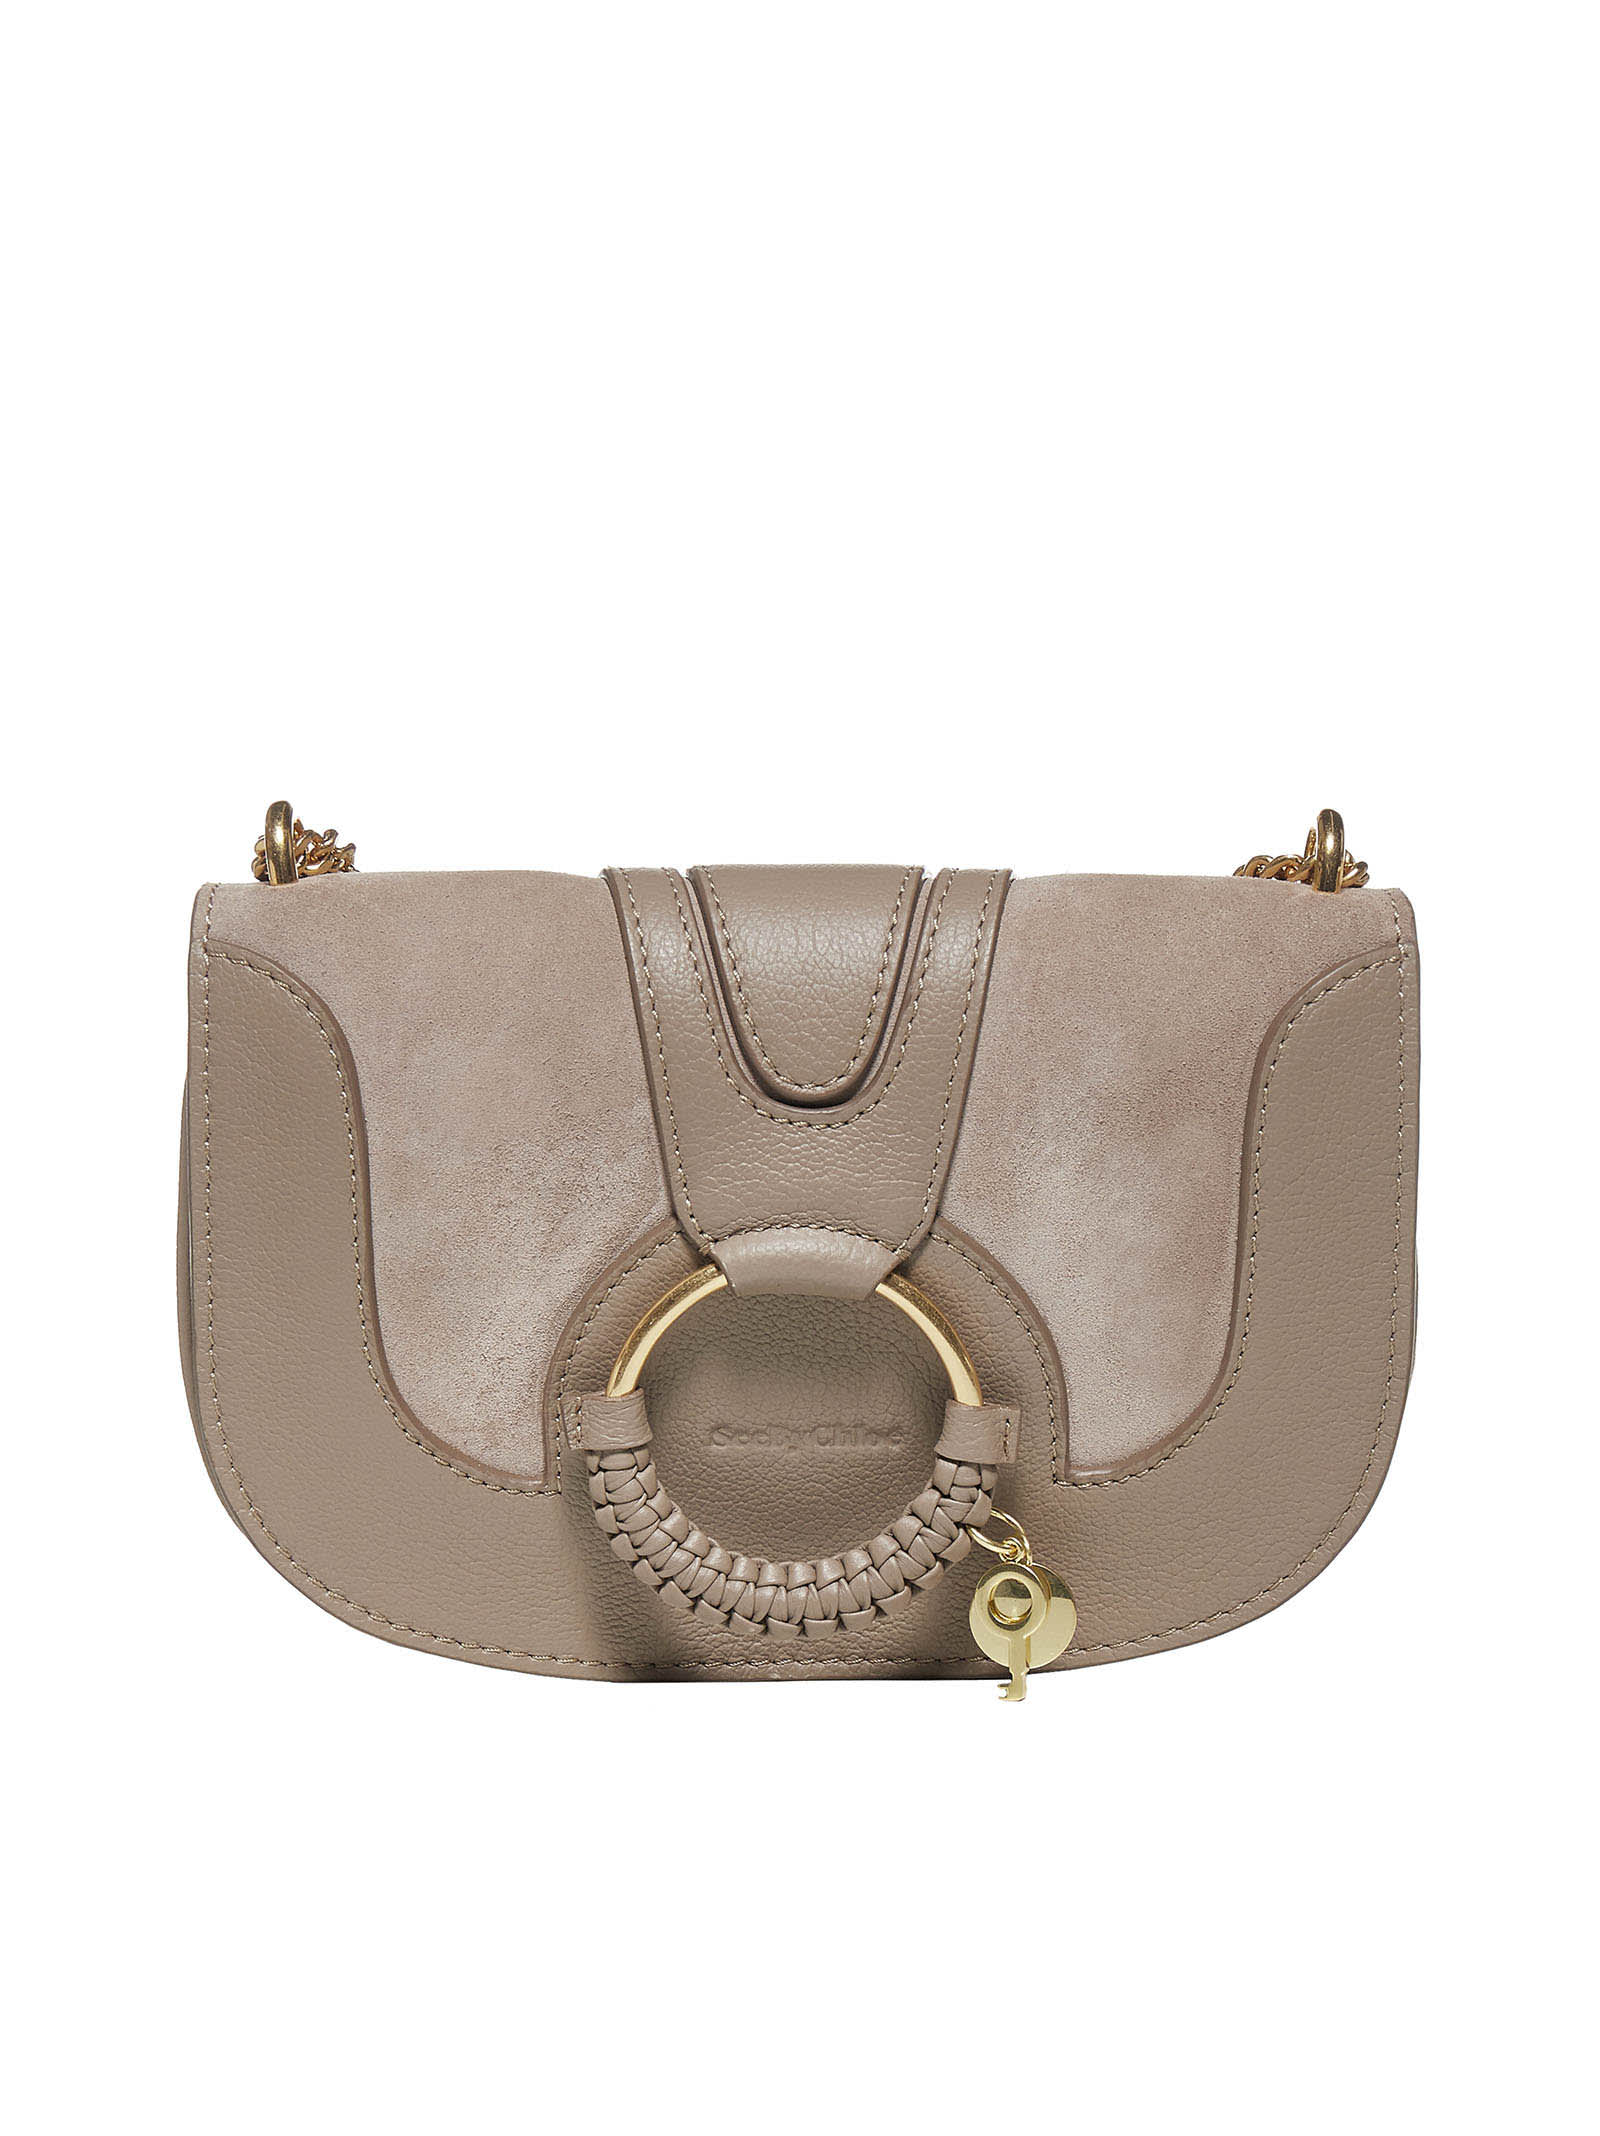 SEE BY CHLOÉ HANA EVENING LEATHER AND SUEDE SHOULDER BAG,11743500